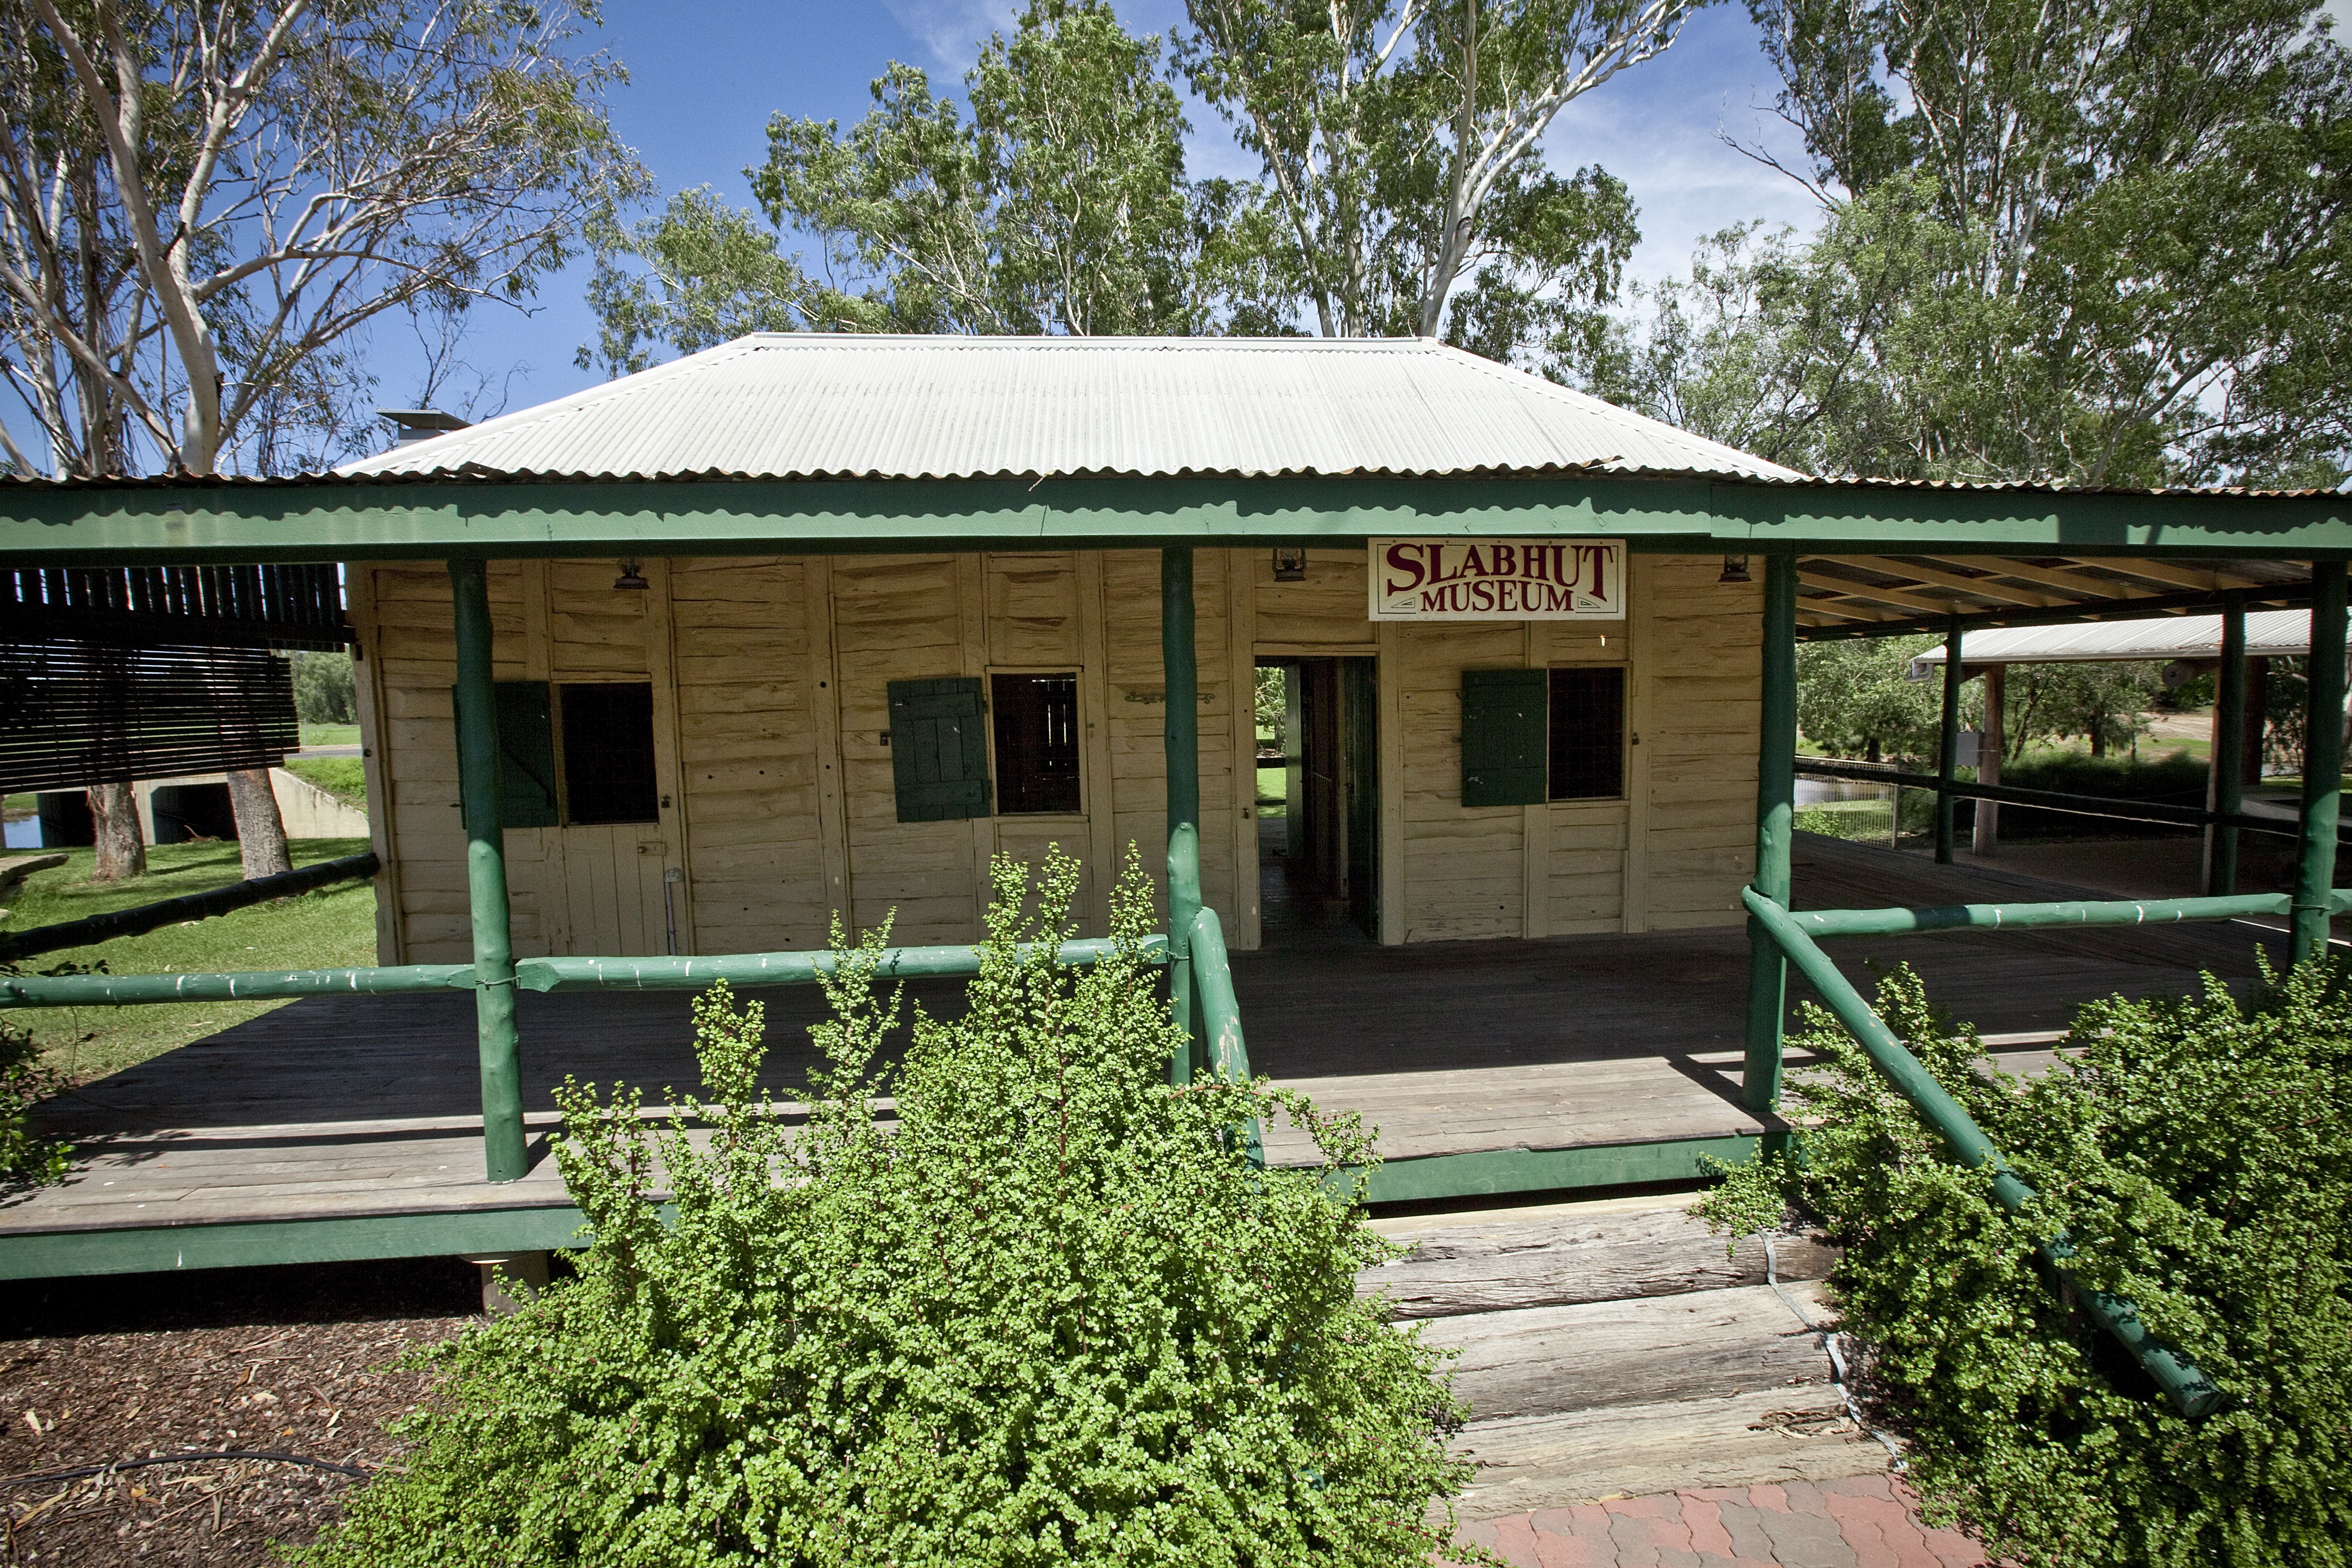 Lenroy Slab Hut - Find Attractions